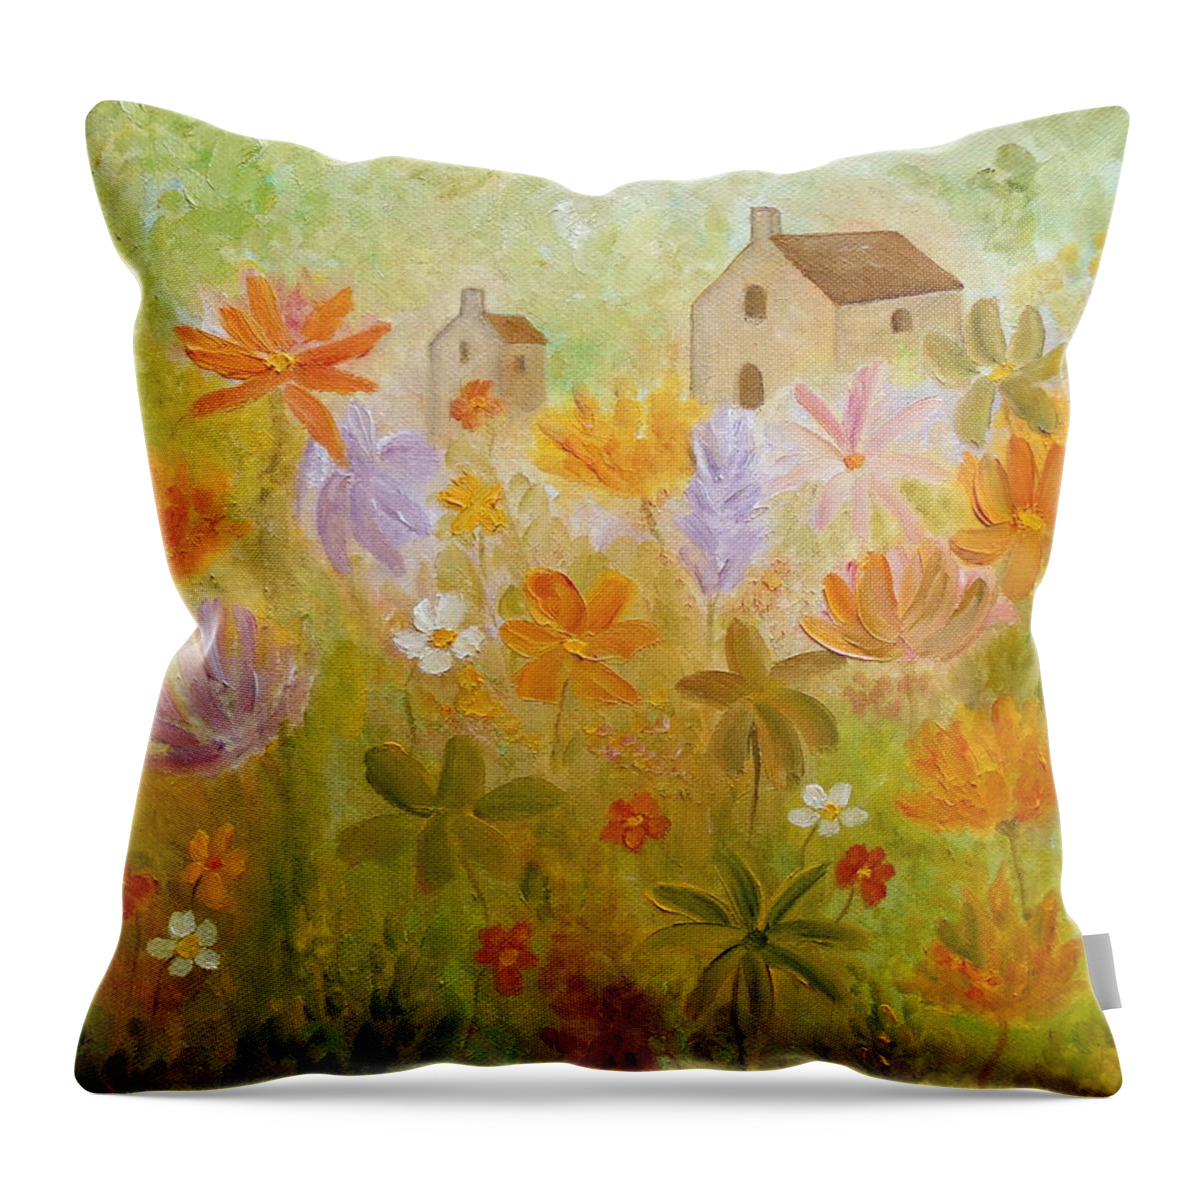 Flowers Palette Throw Pillow featuring the painting Hidden Folk by Angeles M Pomata